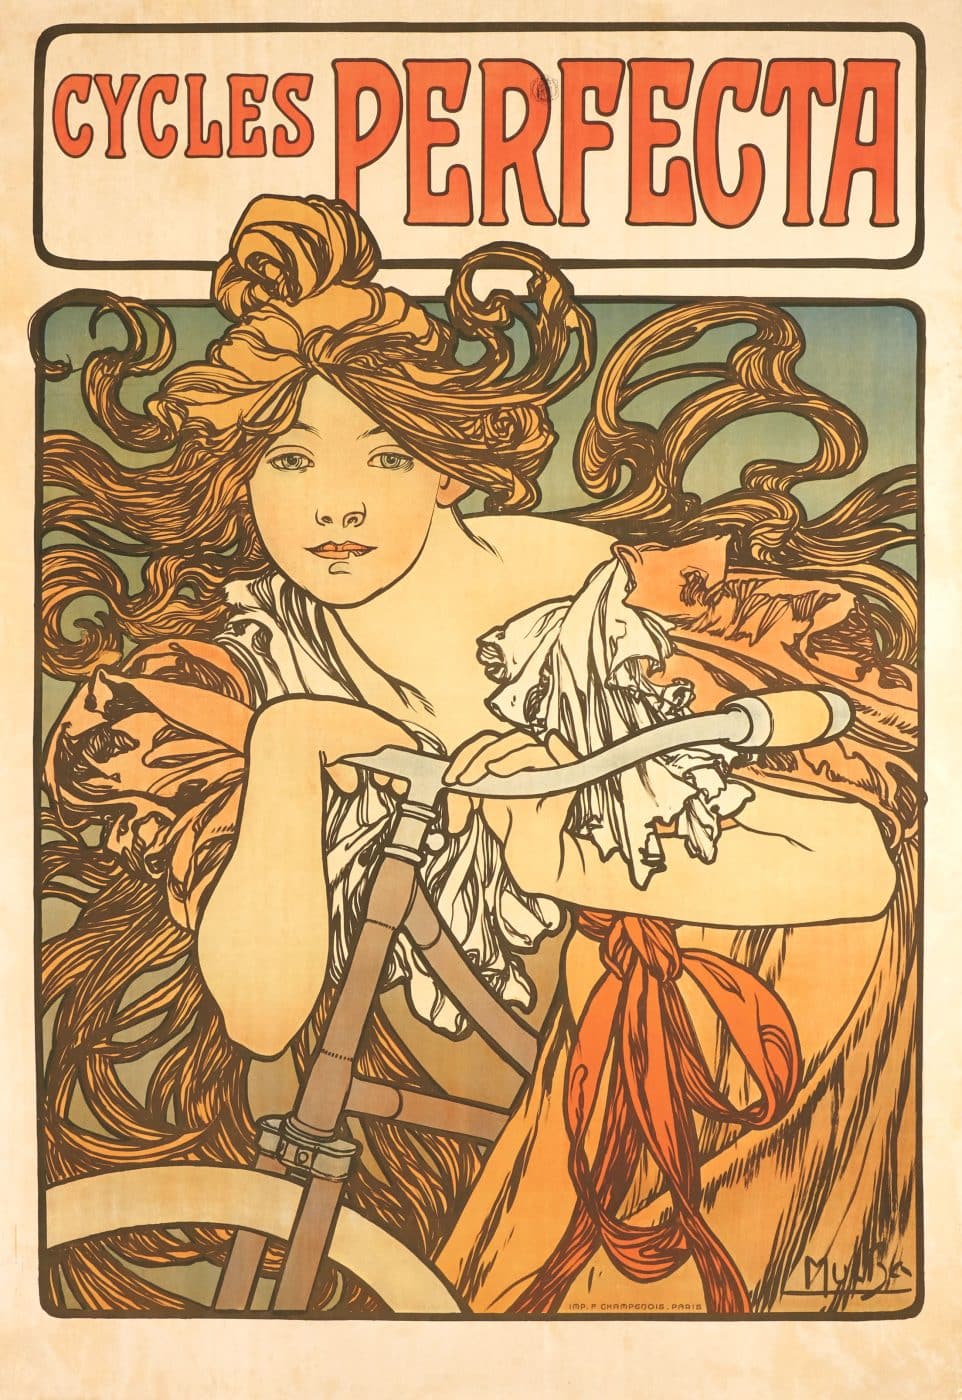 Advertisement for Perfecta bicycles by Alphonse Mucha